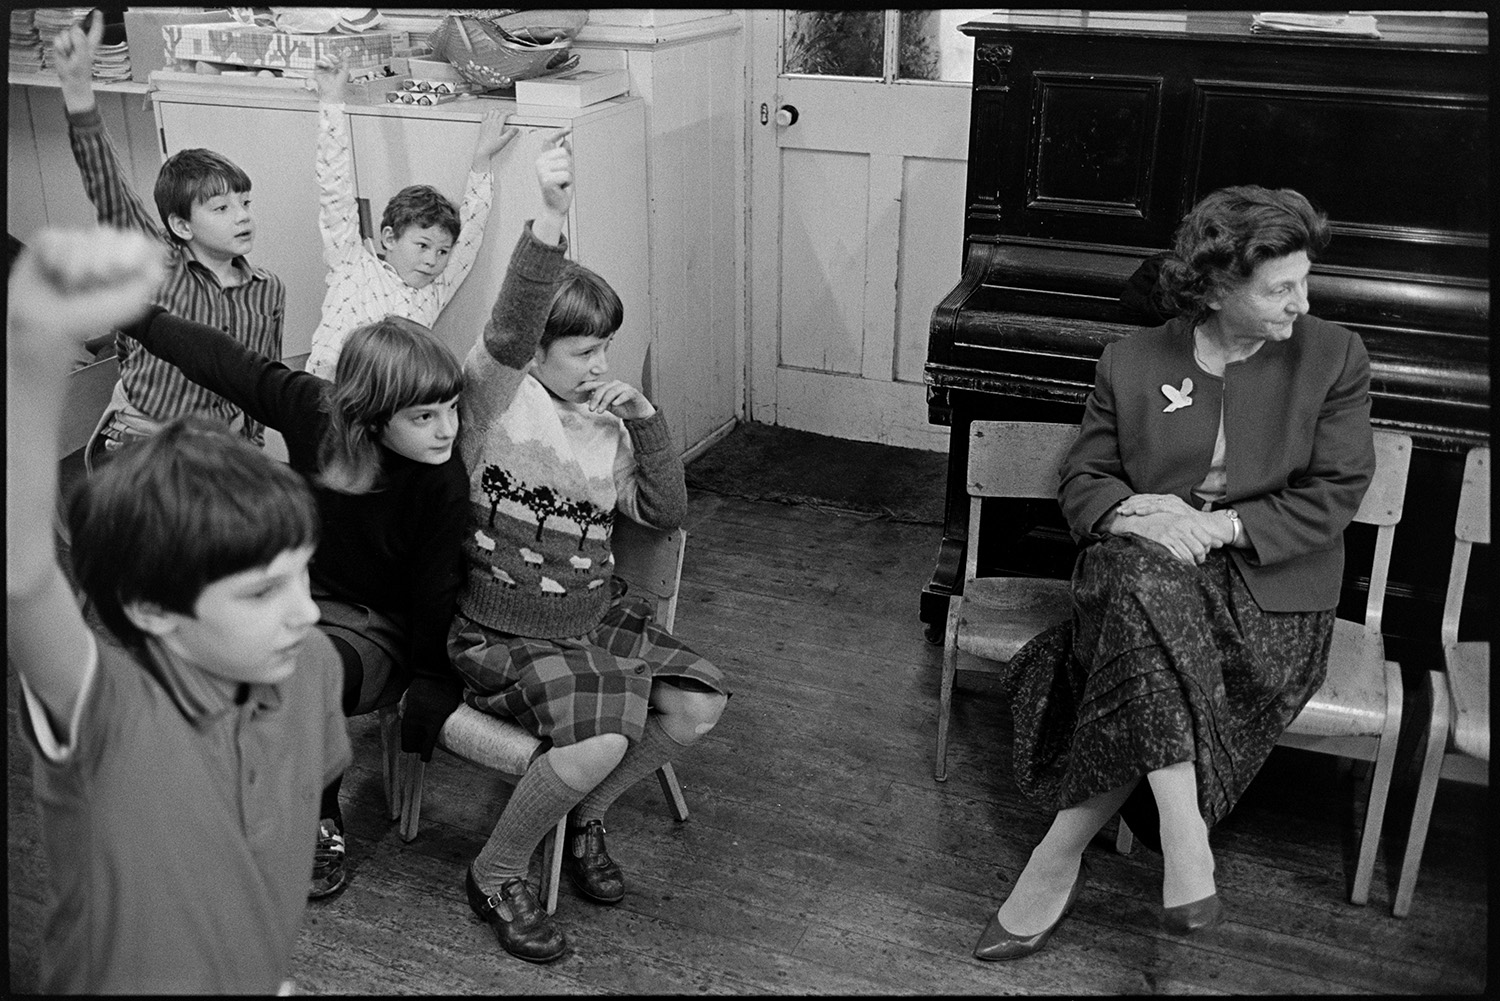 Christmas end of term party in primary school, games, teacher talking to pupils.
[A Christmas end of term party at Chulmleigh Primary School. The teachers are organising games for the pupils in the classroom, who are sitting on chairs with their hands in the air. A woman is sitting on a school chair in front of a piano.]